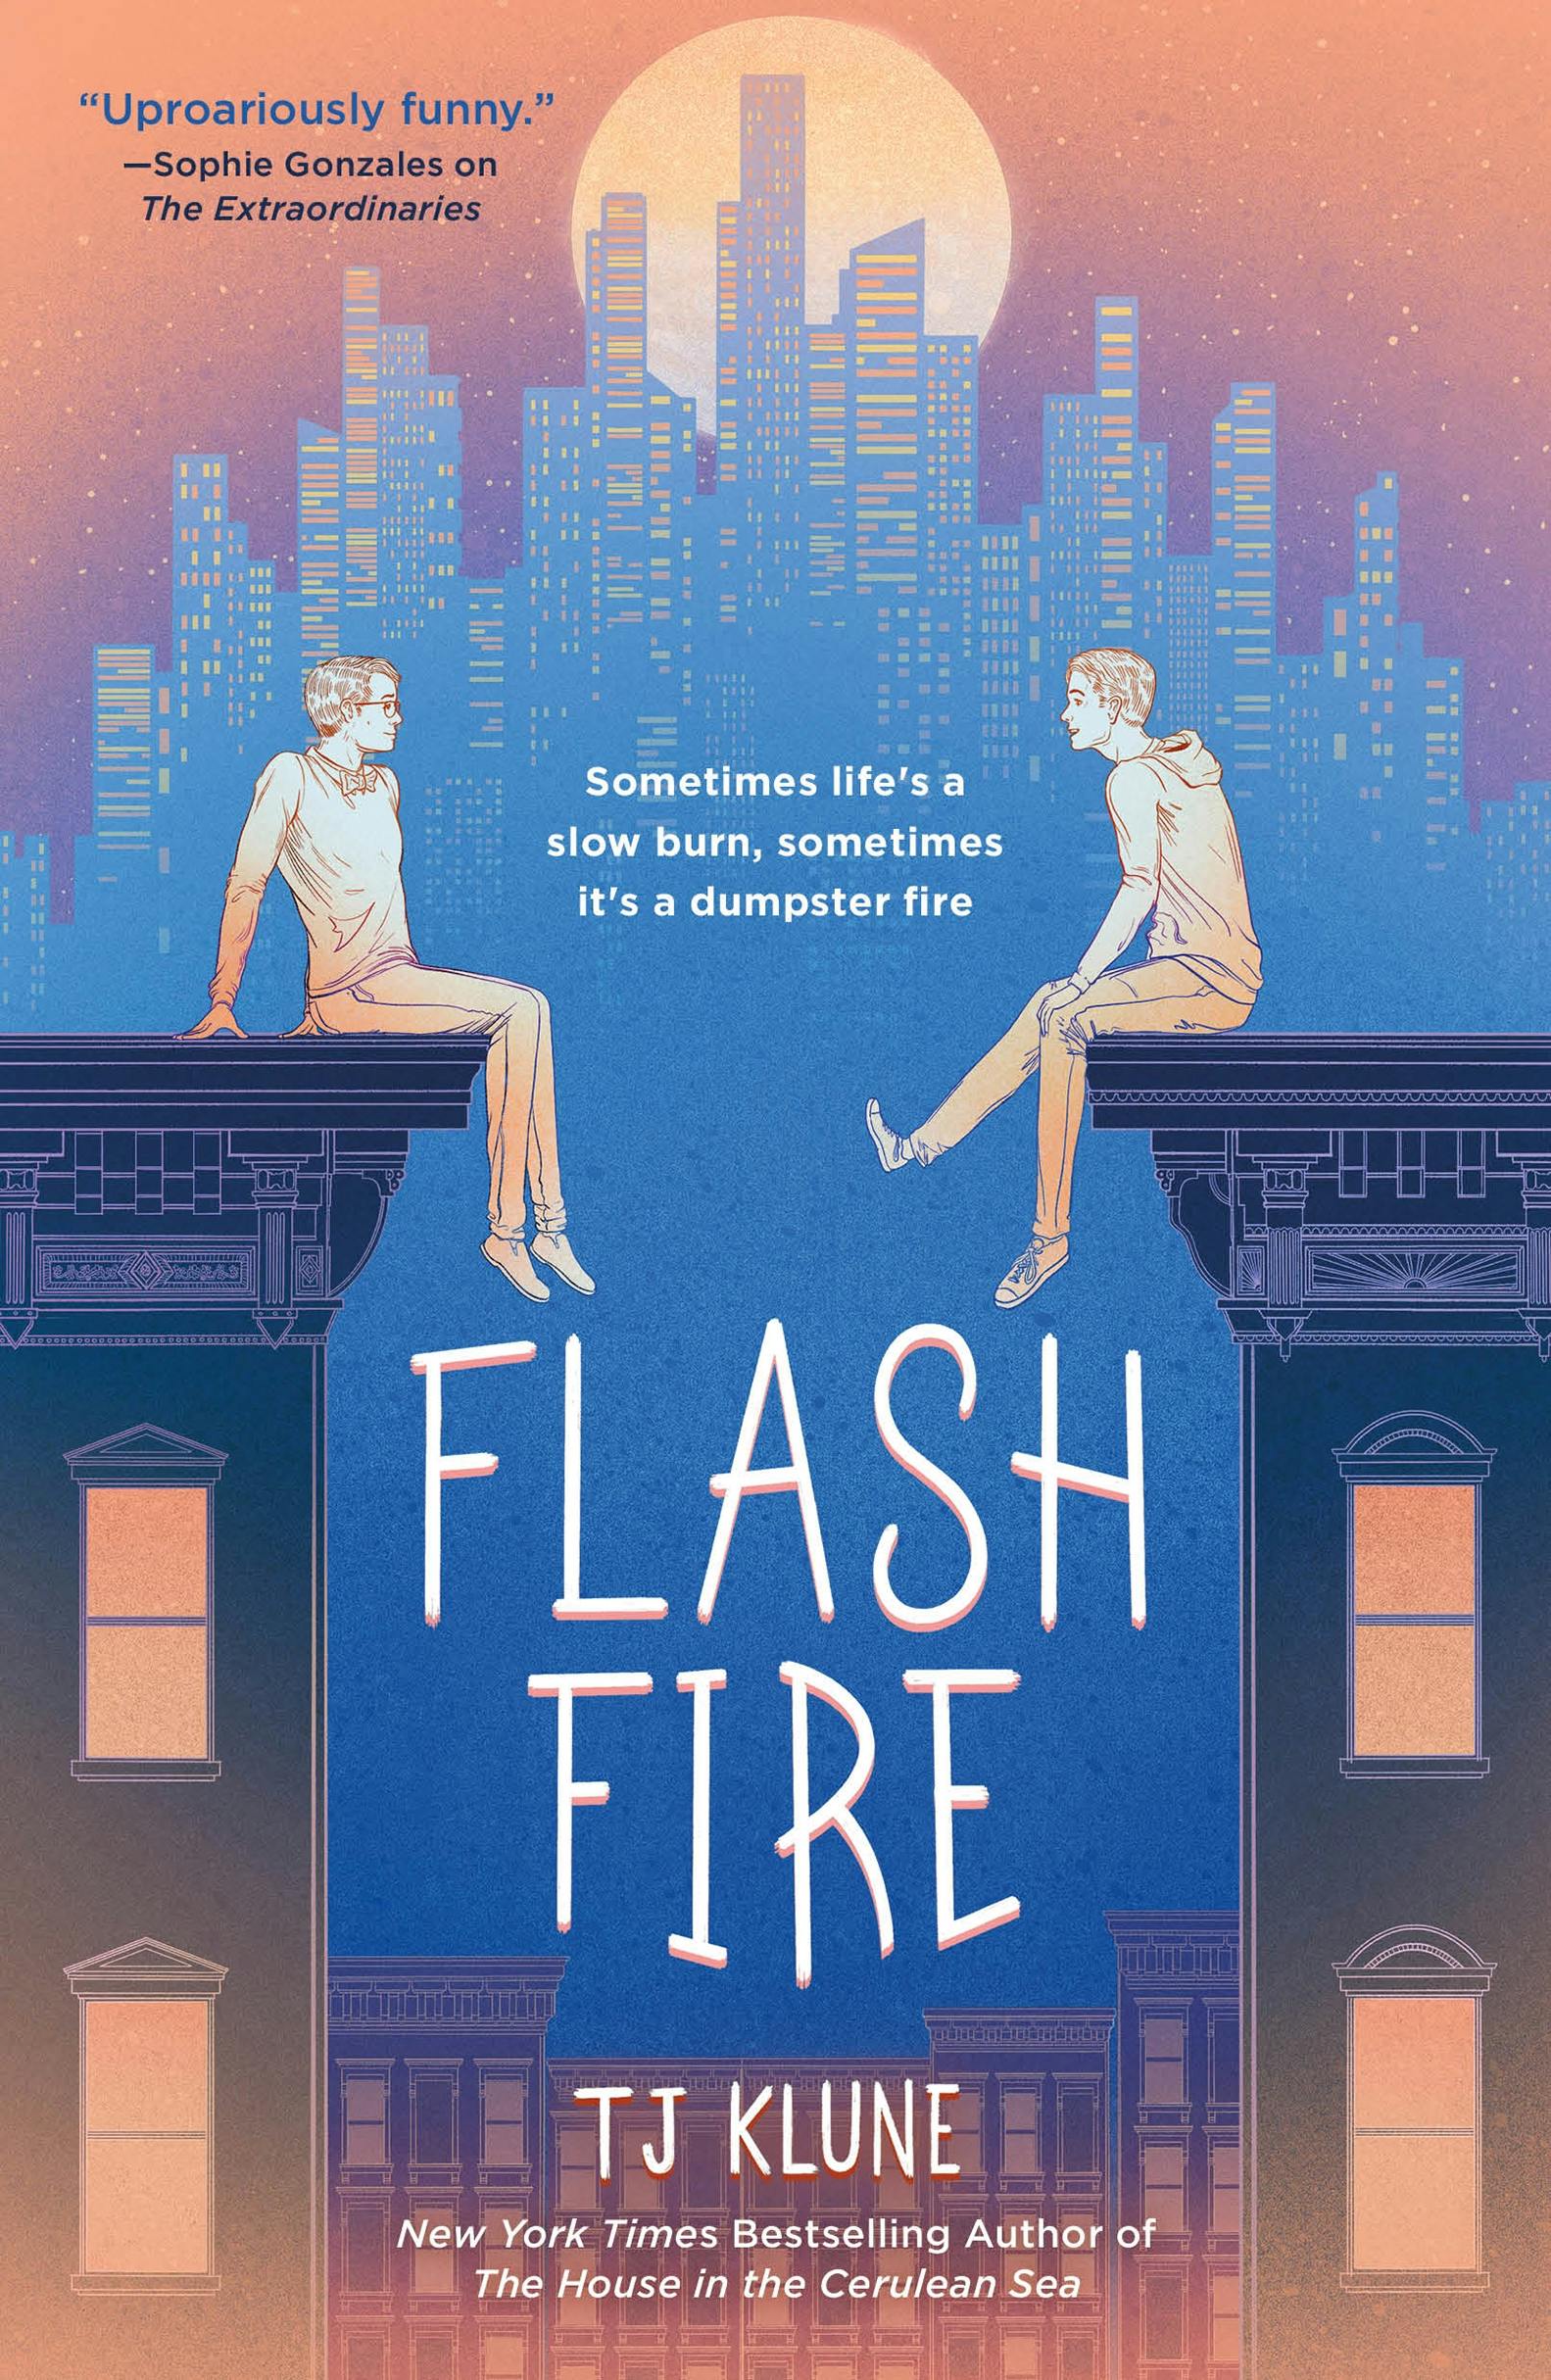 Cover for the book titled as: Flash Fire